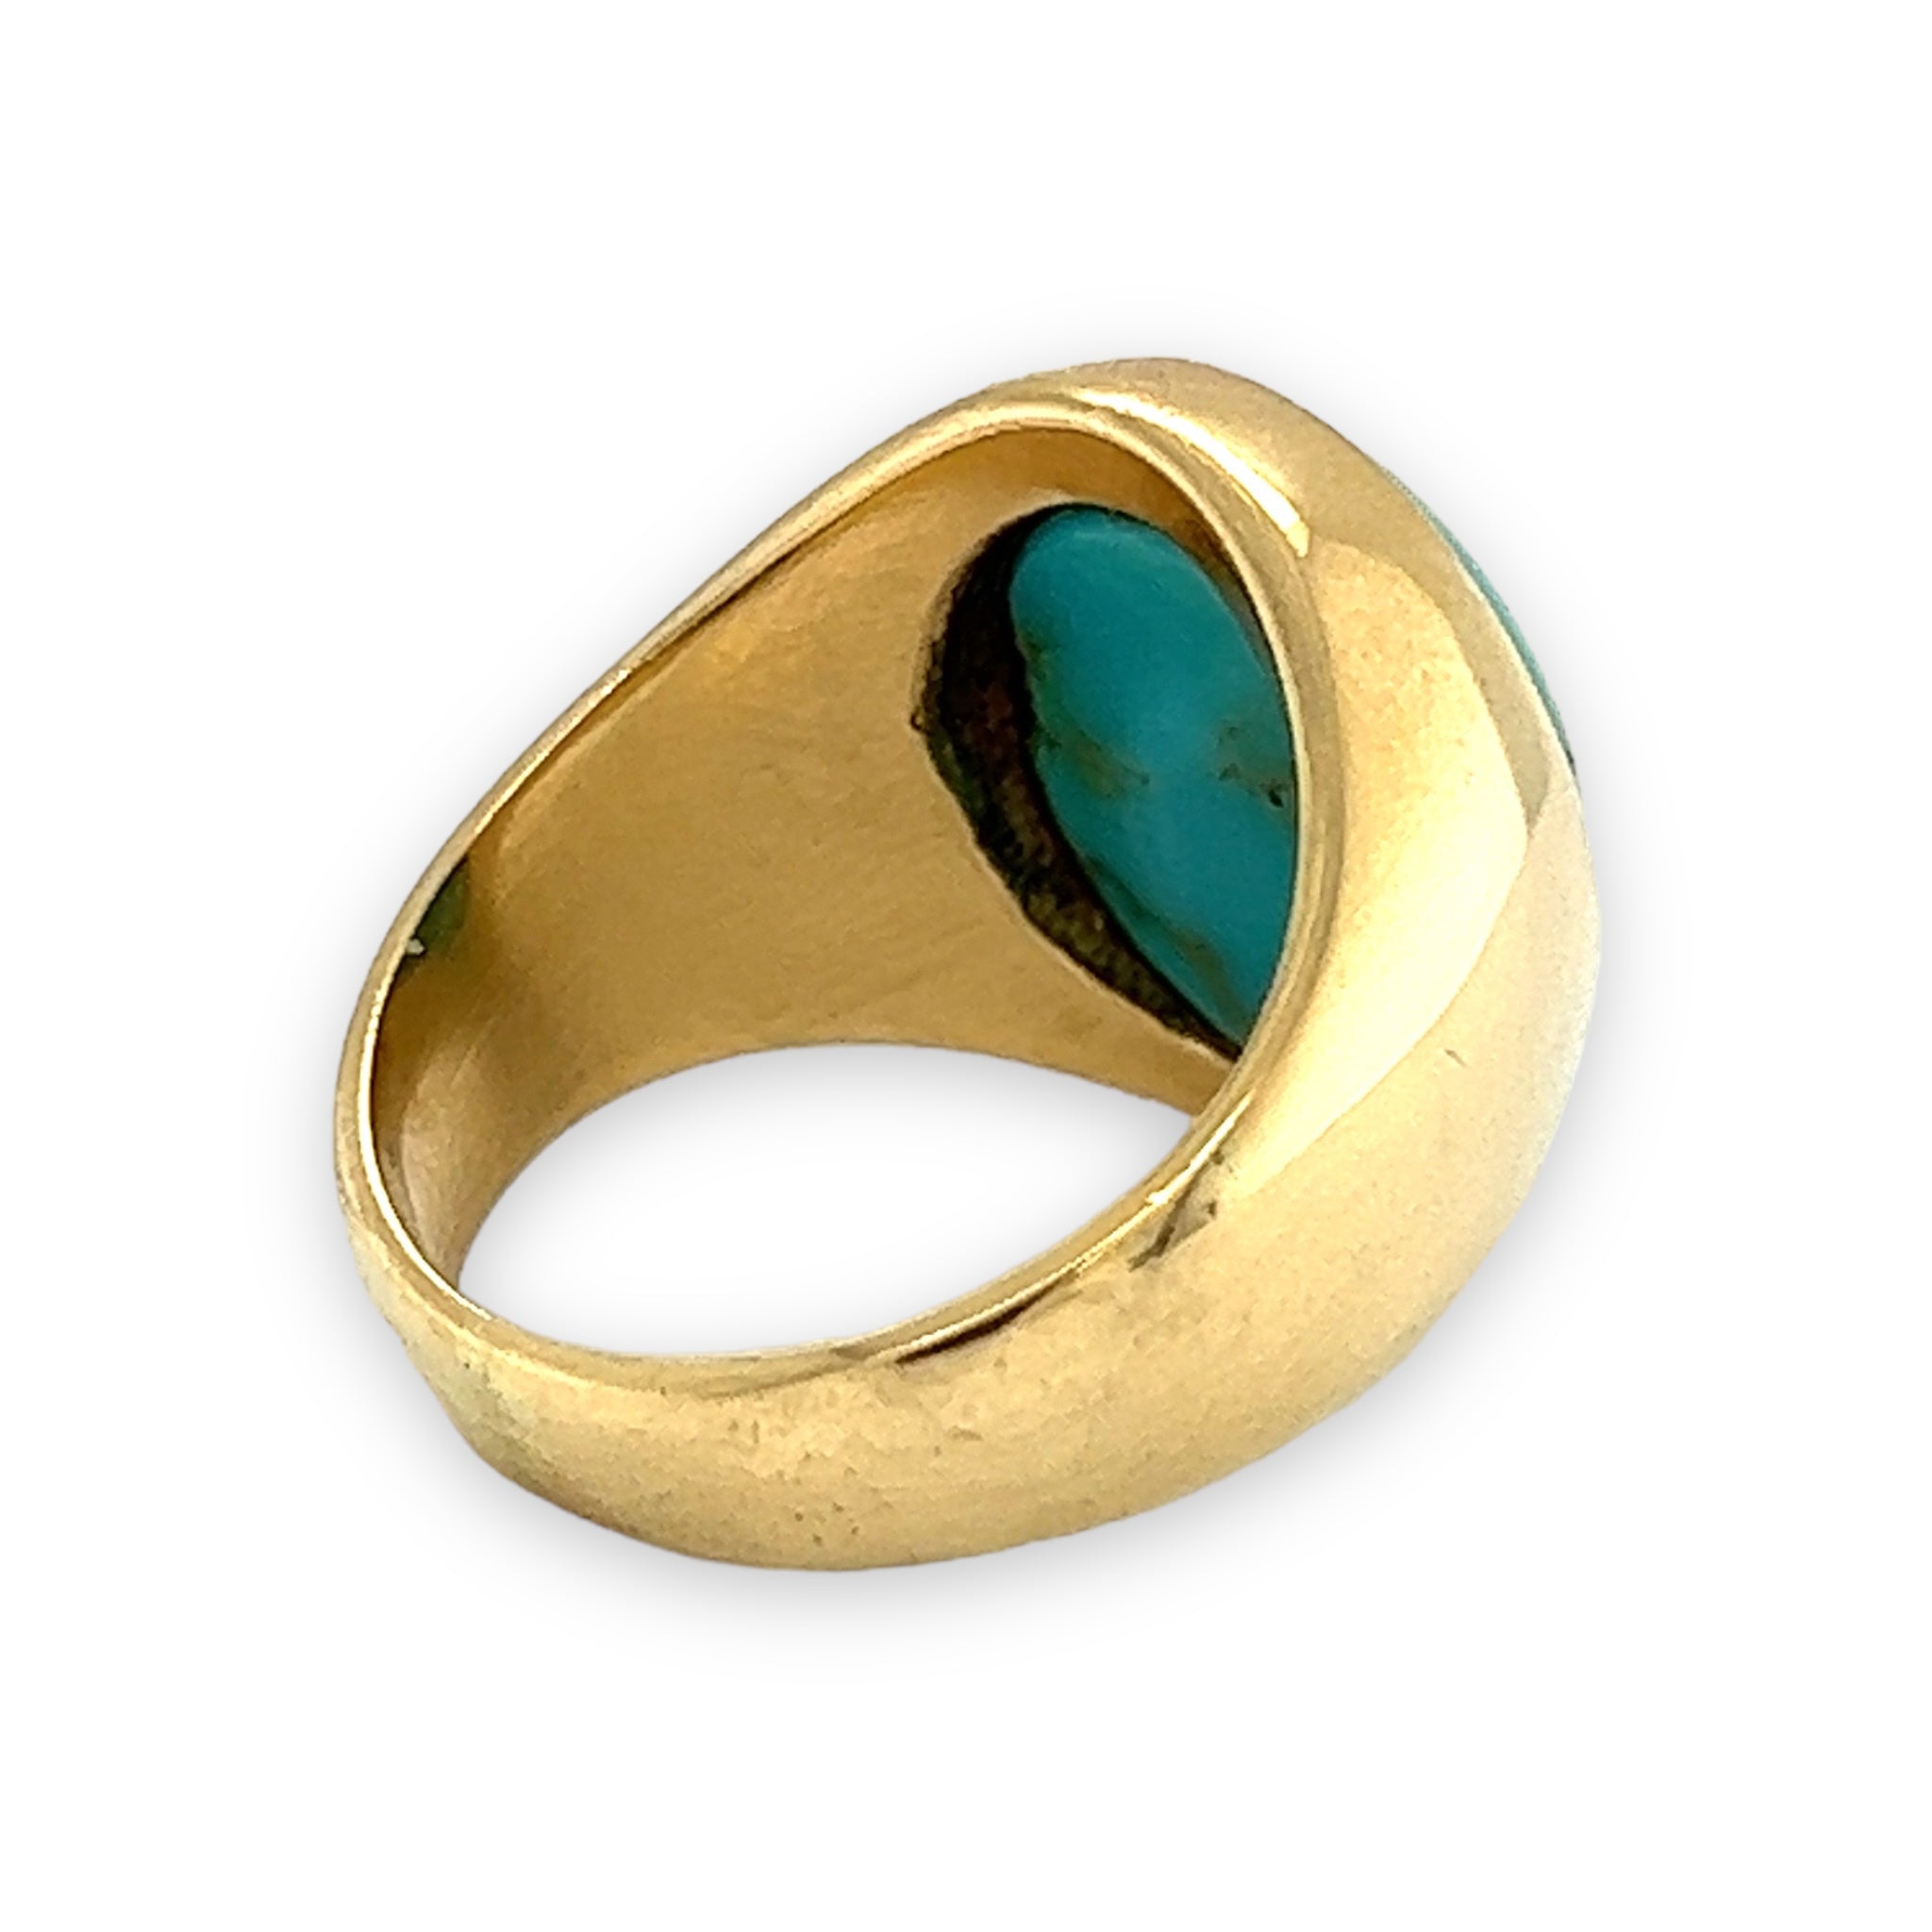 Buy Men's XL Gold Plated Over Silver Genuine Turquoise Ring, Gemstone 14K  Gold Plated Signet Ring, Gold Feroza Stone Ring, Gift for Dad Online in  India - Etsy